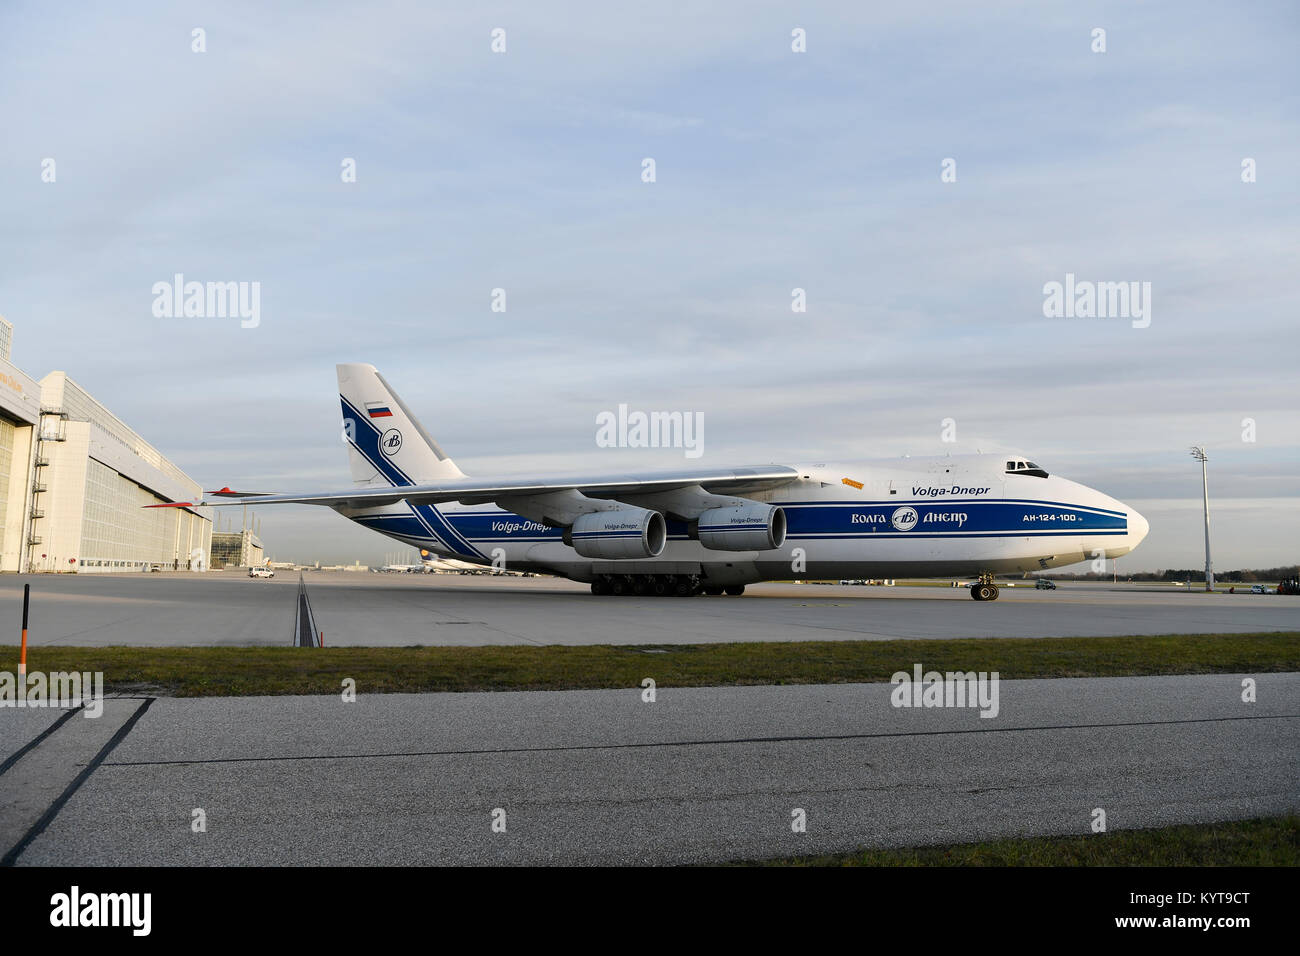 Antonov, An124-100, Cargo Plane, Roll In On Position, Cargo, Freight, aircraft, airplane, plane, airlines, airways, roll, in, out,  Munich Airport, Stock Photo